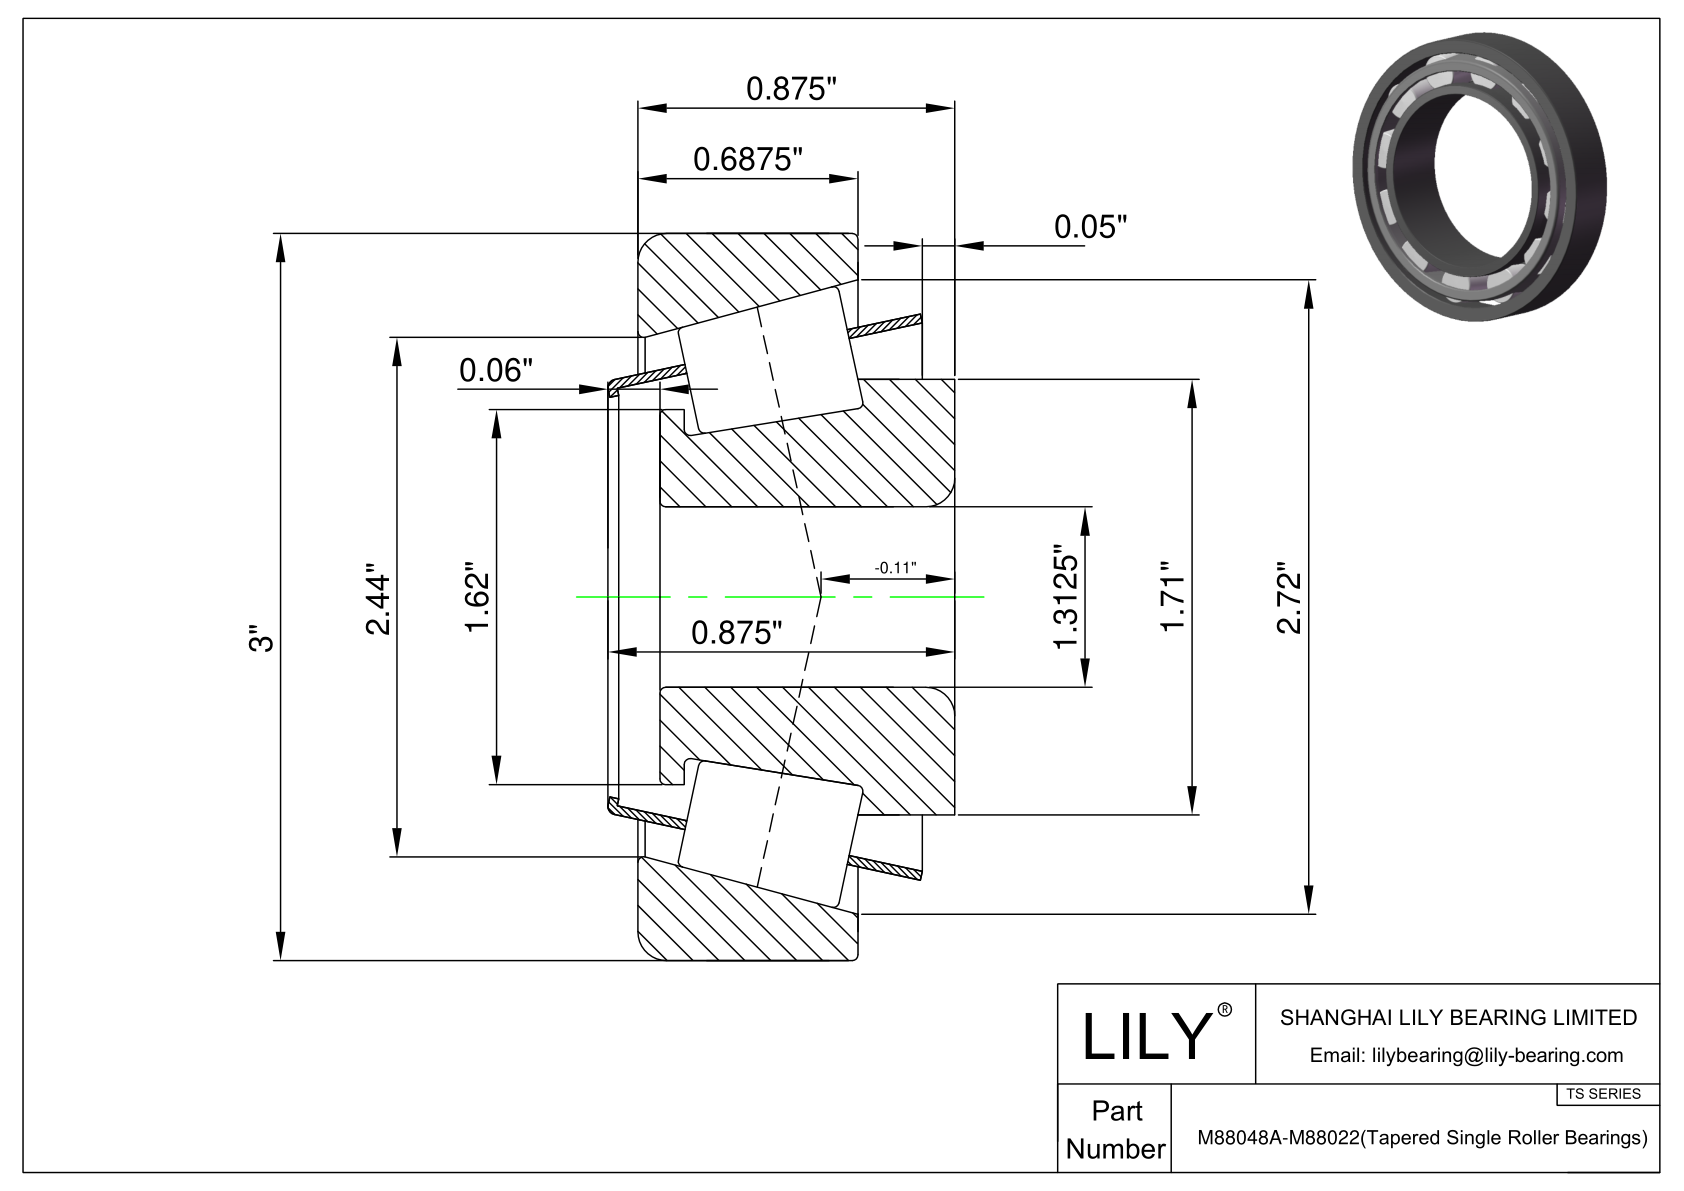 M88048A-M88022 TS (Tapered Single Roller Bearings) (Imperial) cad drawing